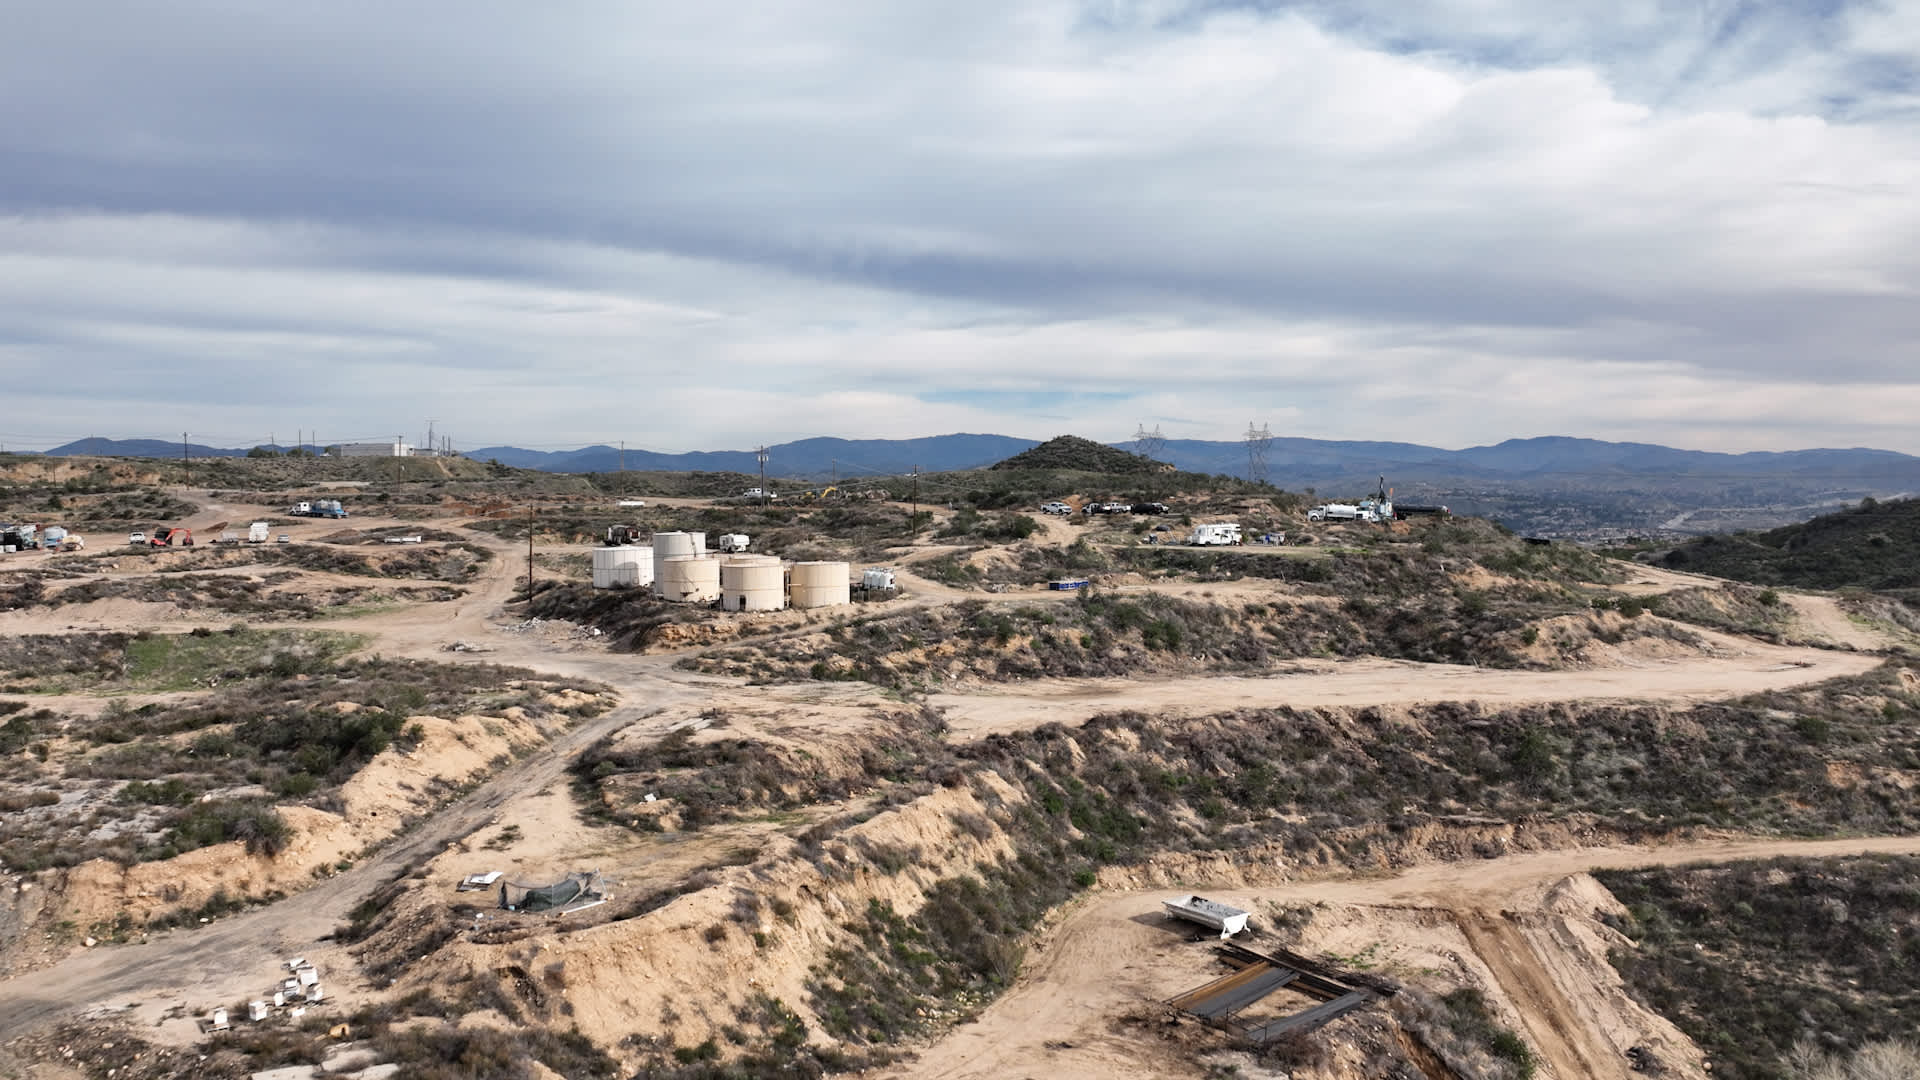 At the Placerita Oil Field in northern Los Angeles County, the California Geologic Energy Management Division is plugging 56 orphaned oil and gas wells.